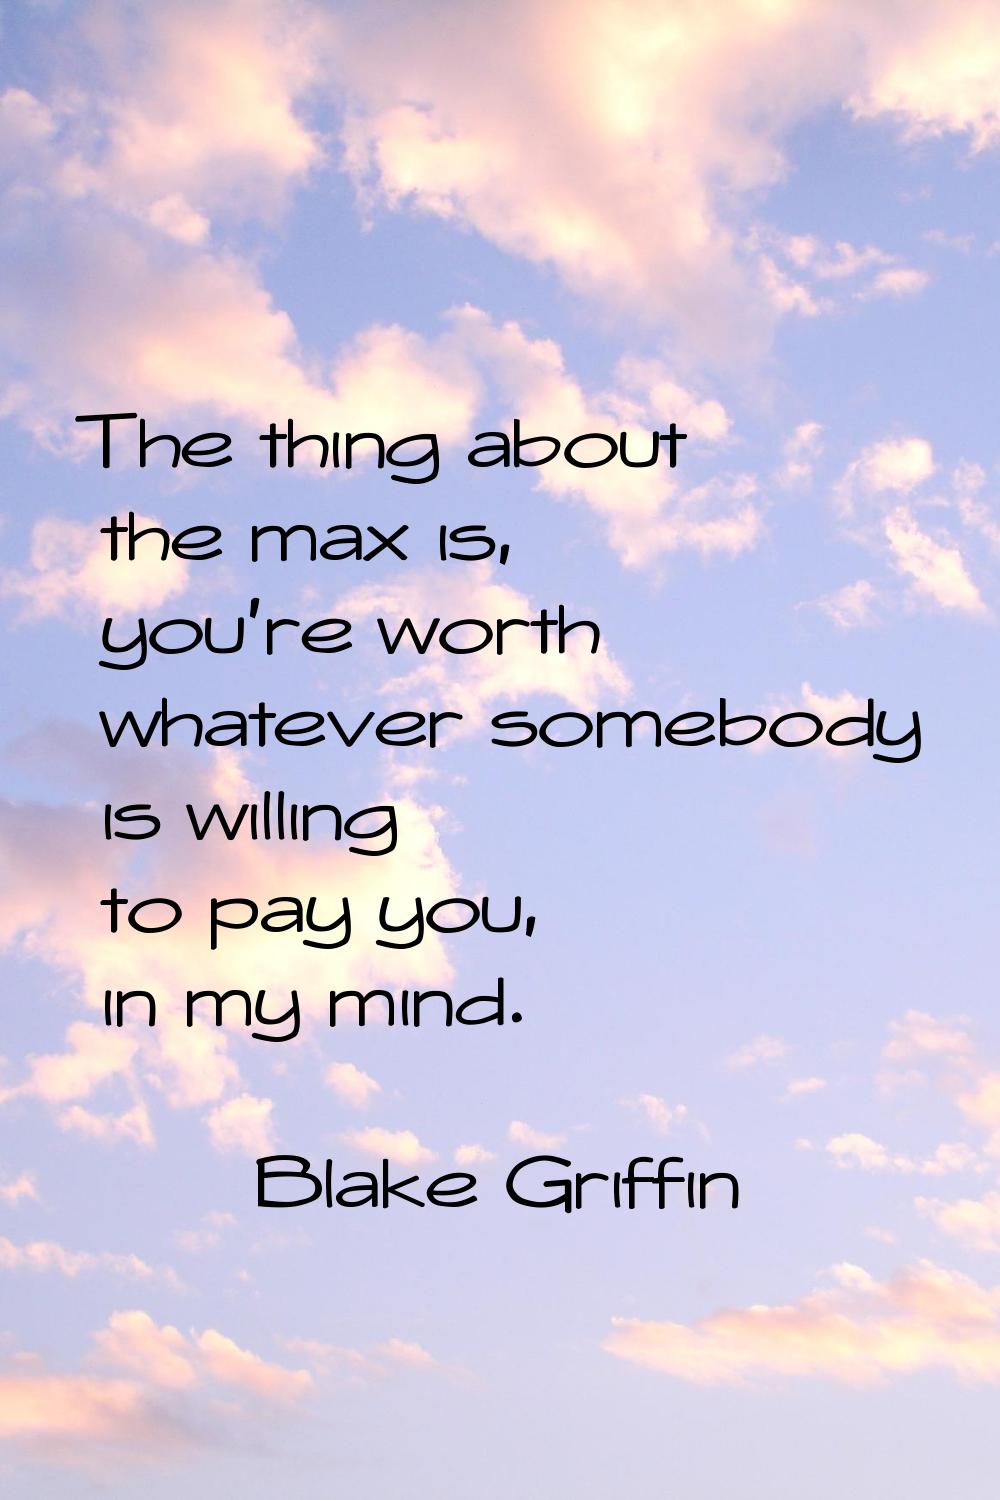 The thing about the max is, you're worth whatever somebody is willing to pay you, in my mind.